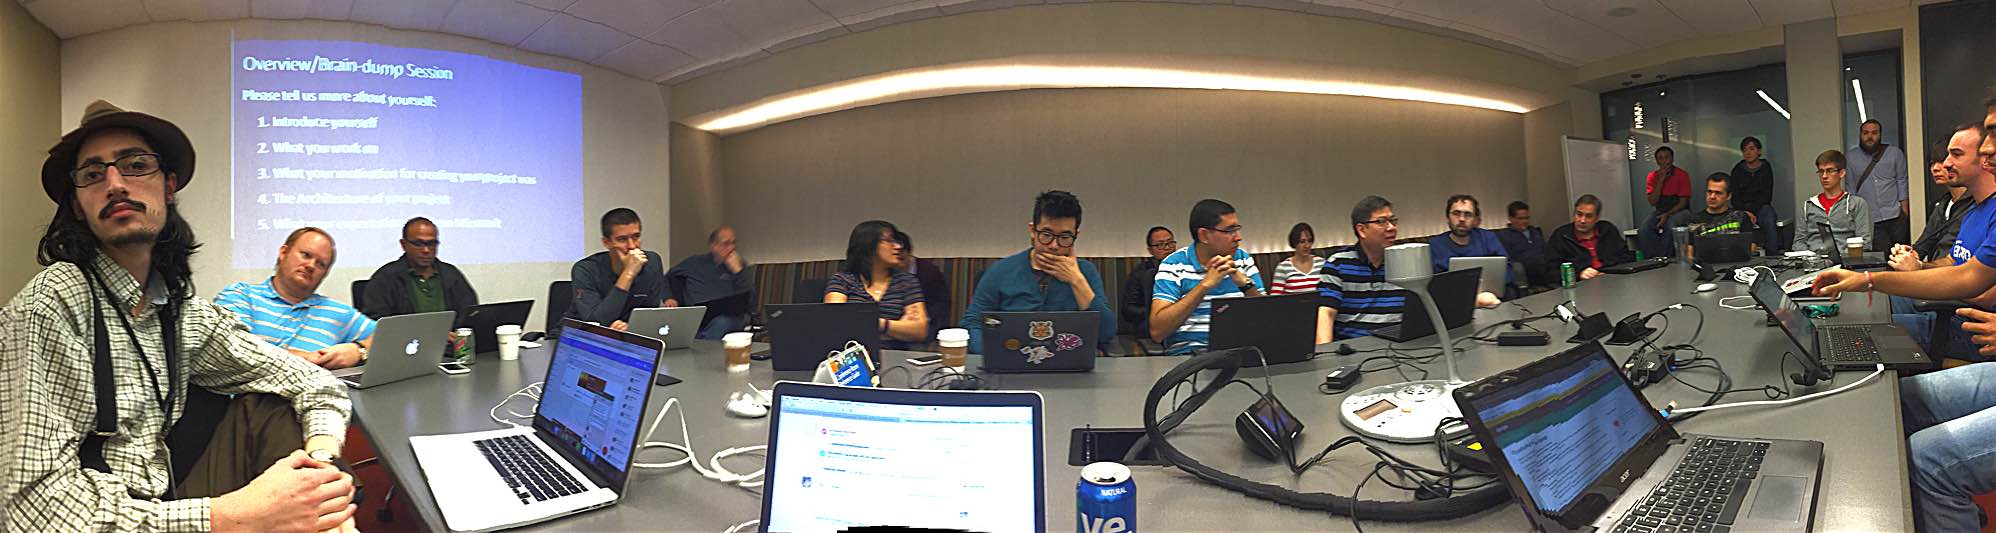 First day of introductions at Microsoft's OSSDataCamp